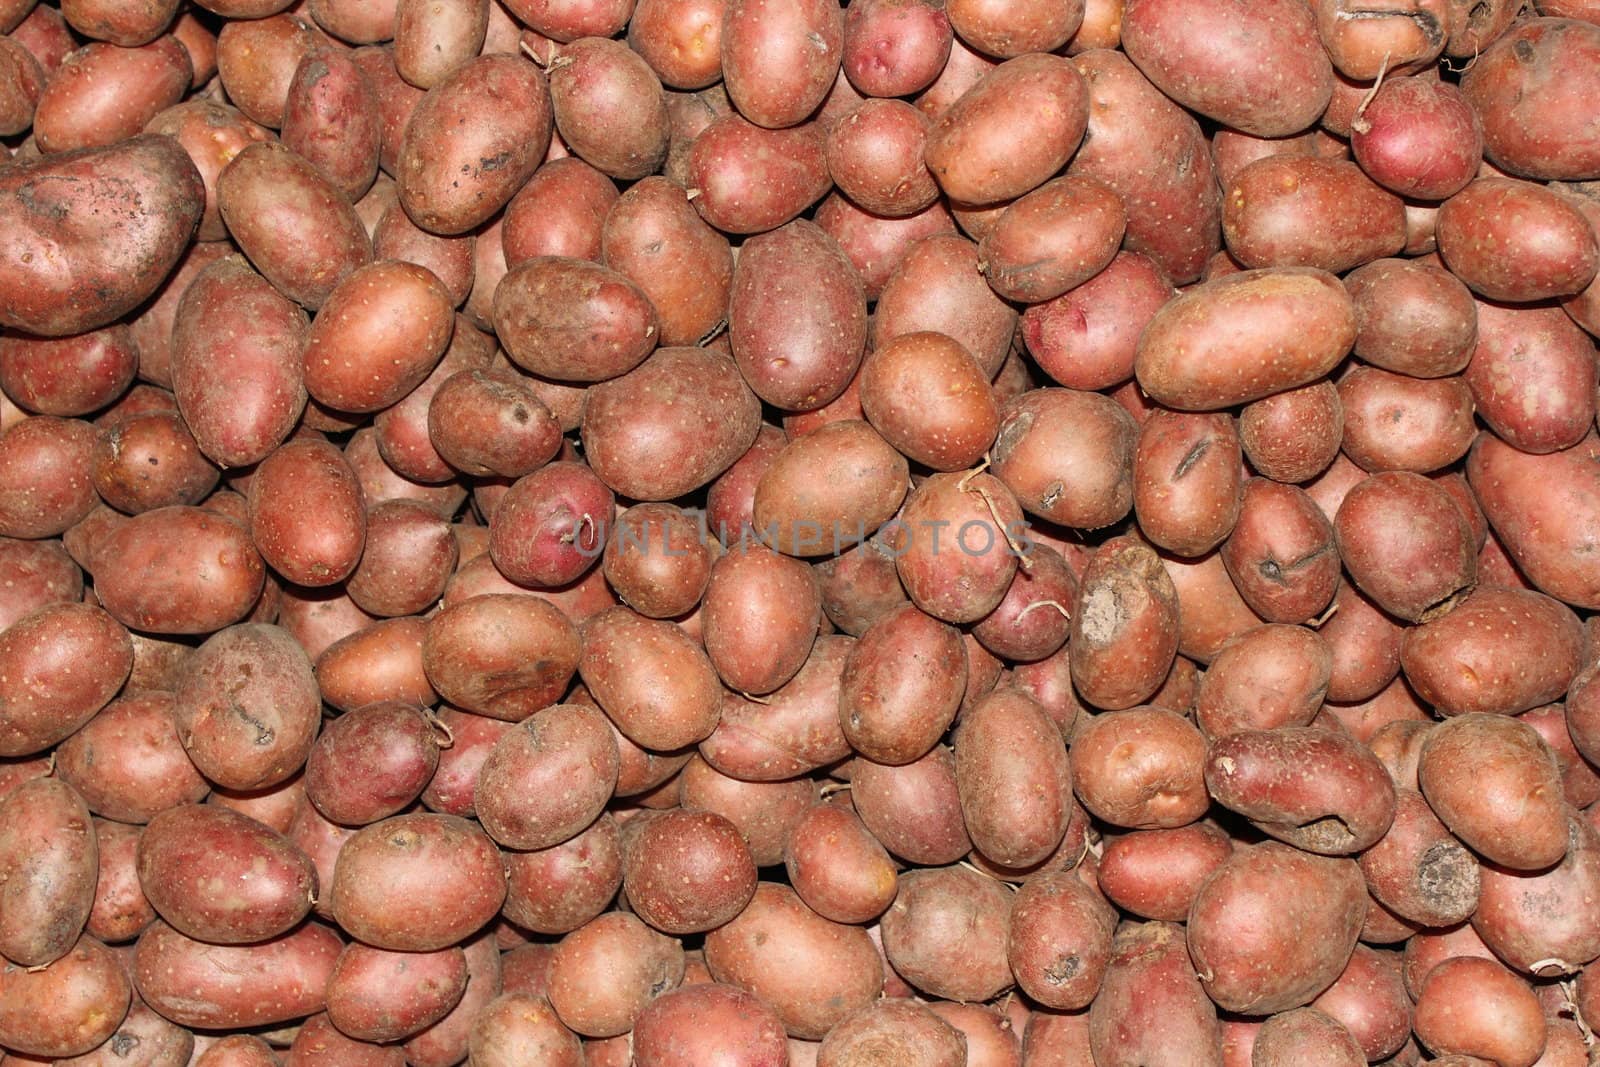 bunch of red potatoes forming an interesting texture